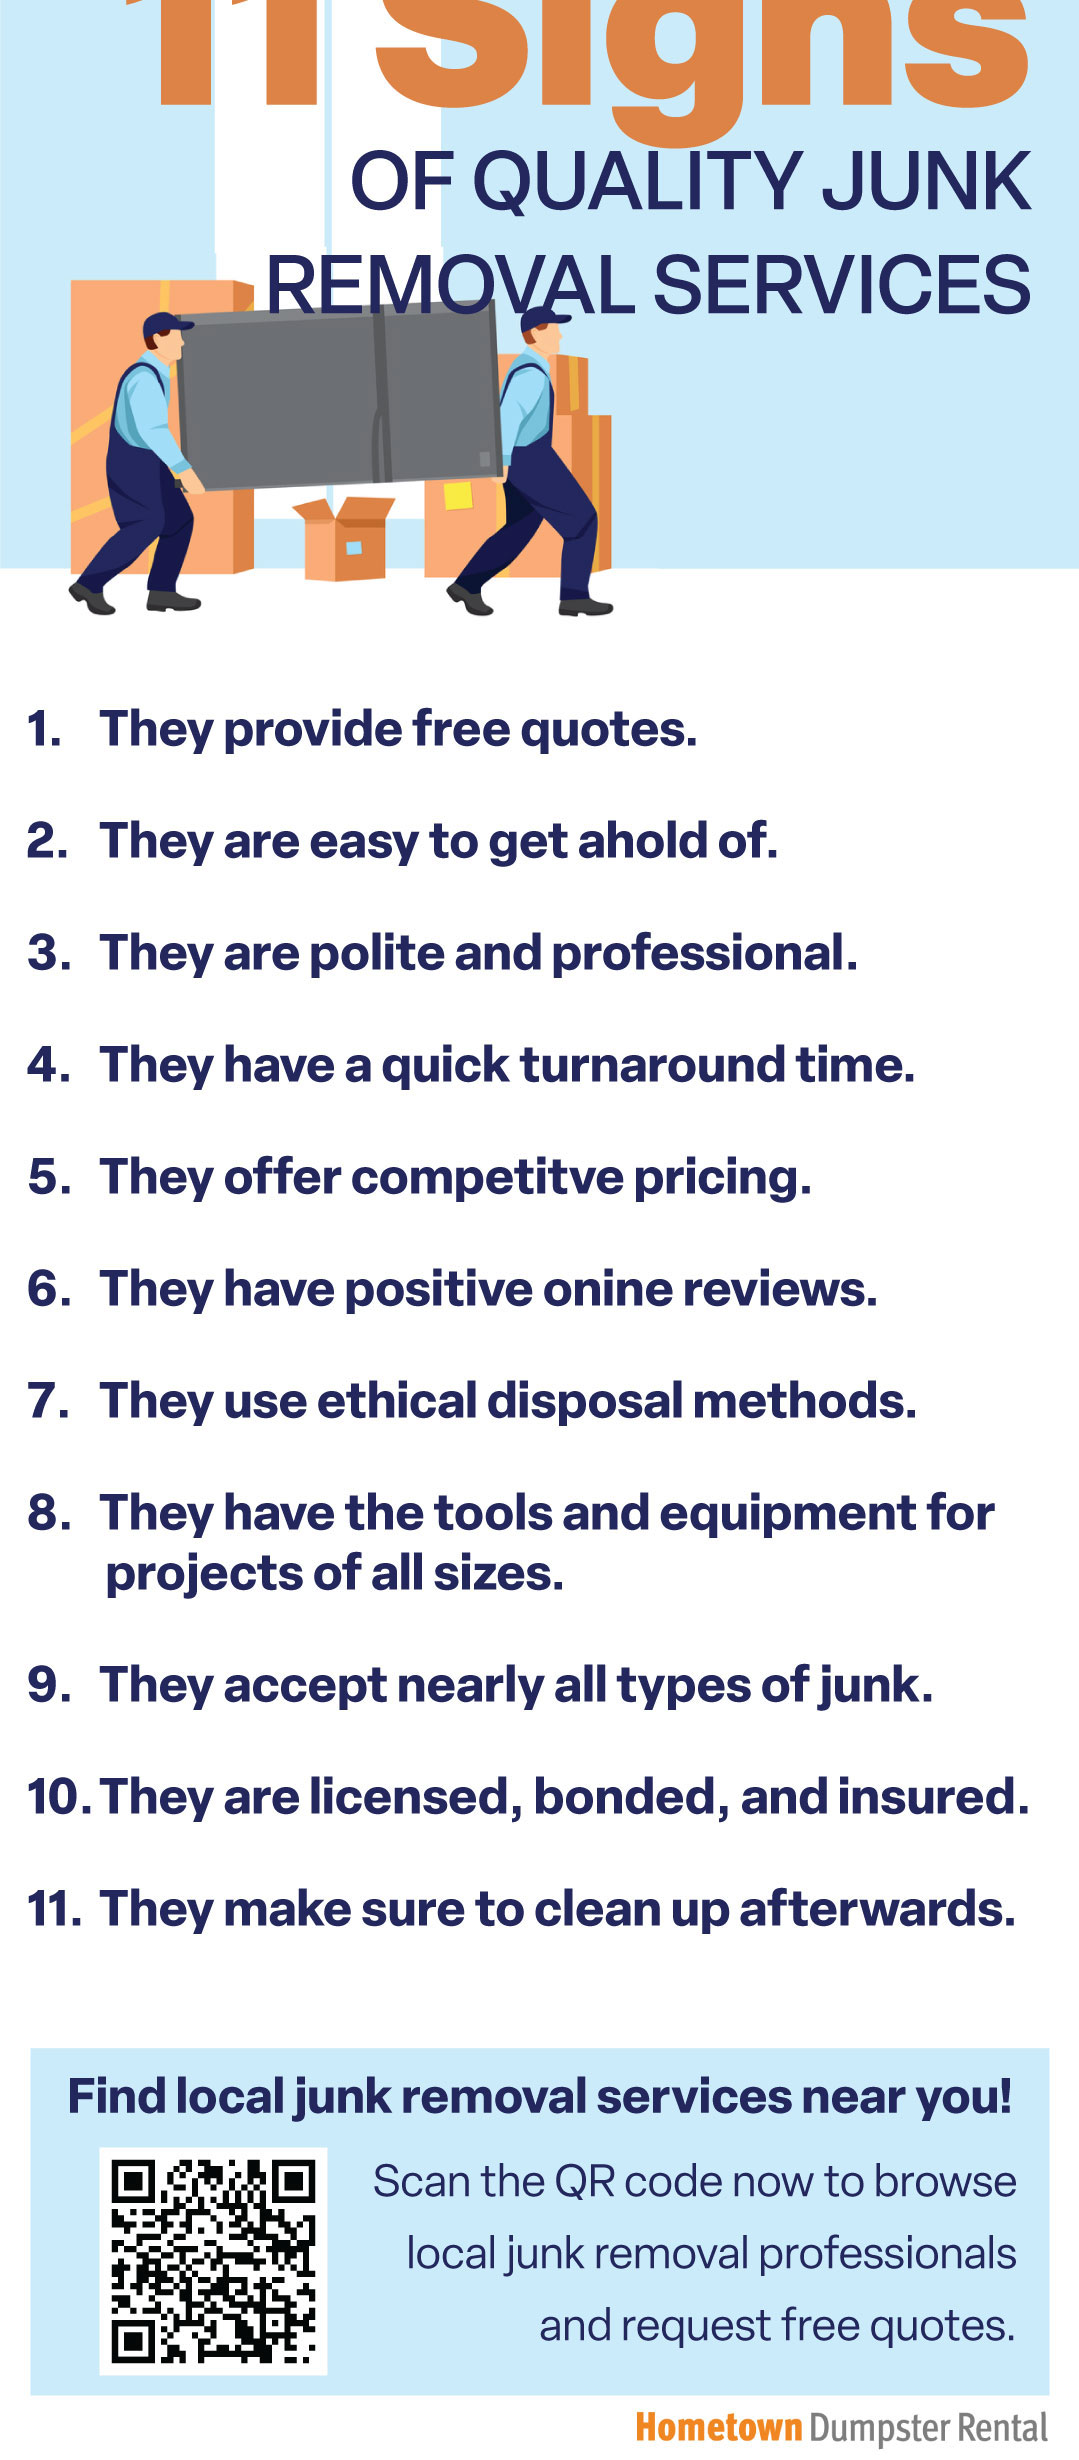 Signs of Quality Junk Removal Services Infographic